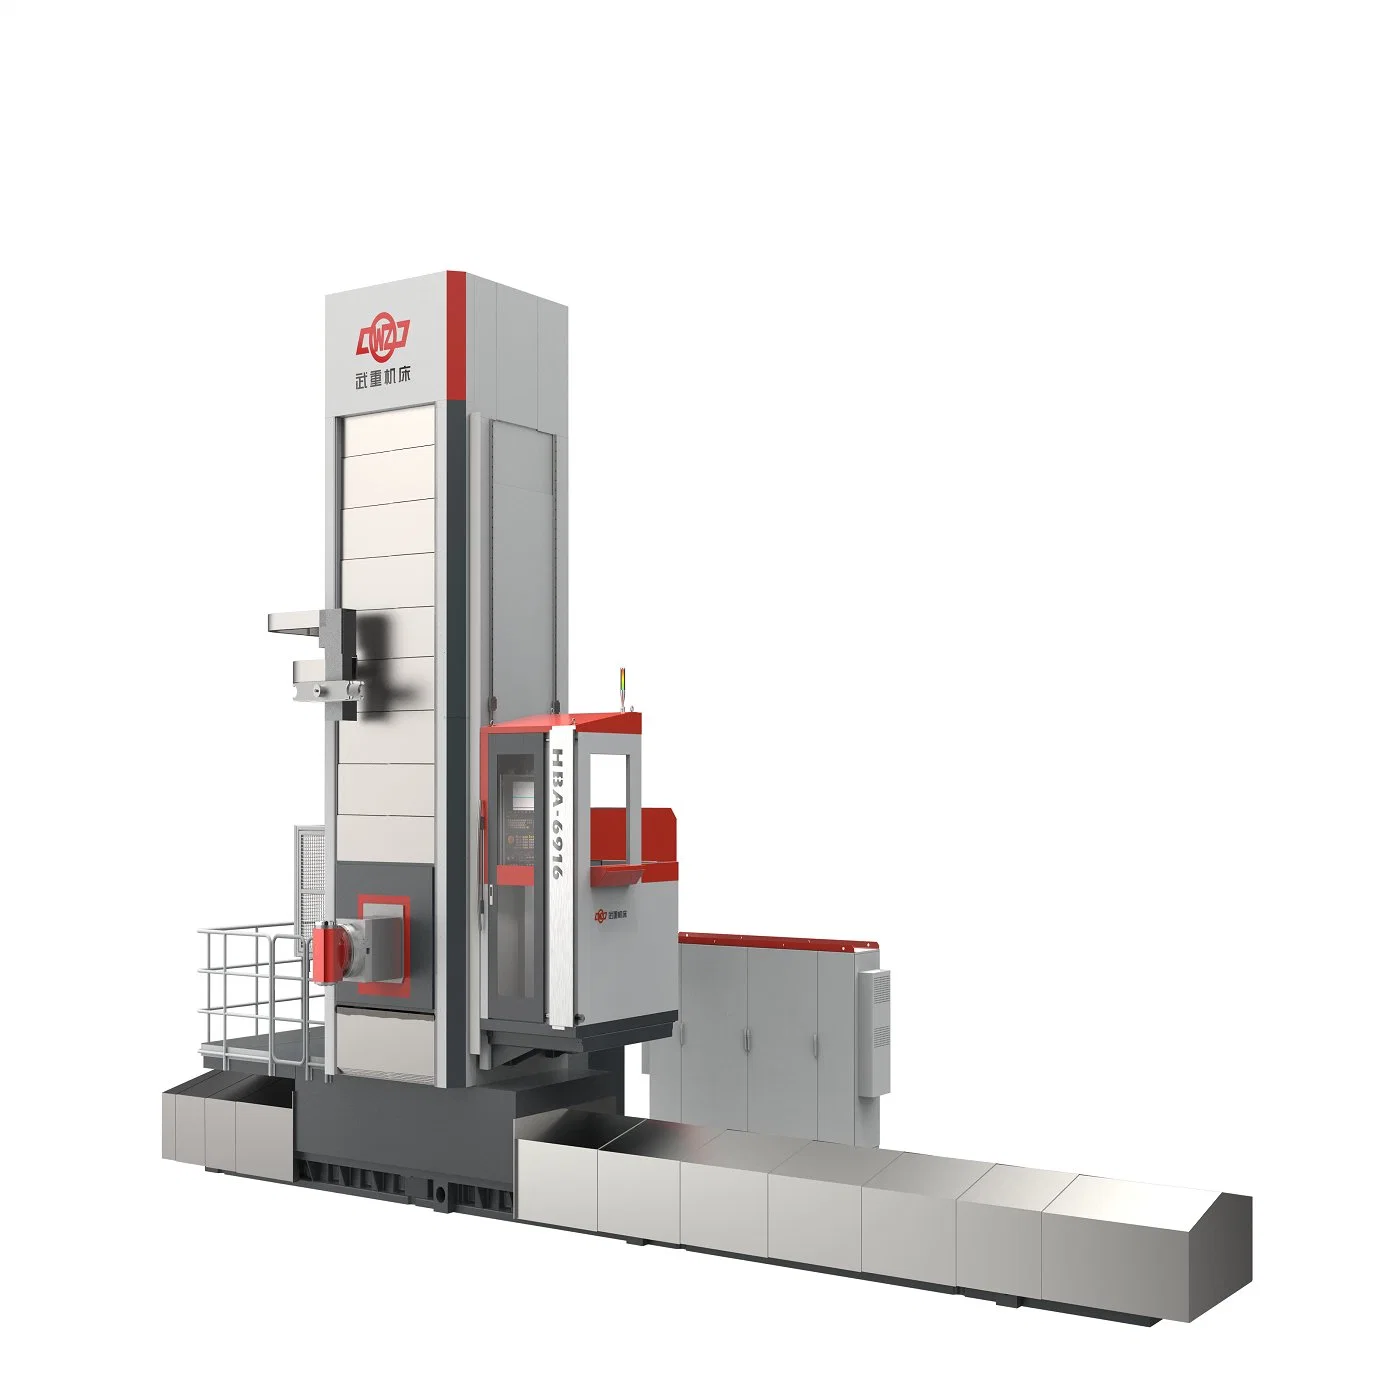 D-Hba69 CNC Double-Ended Floor Type Milling and Boring Machine